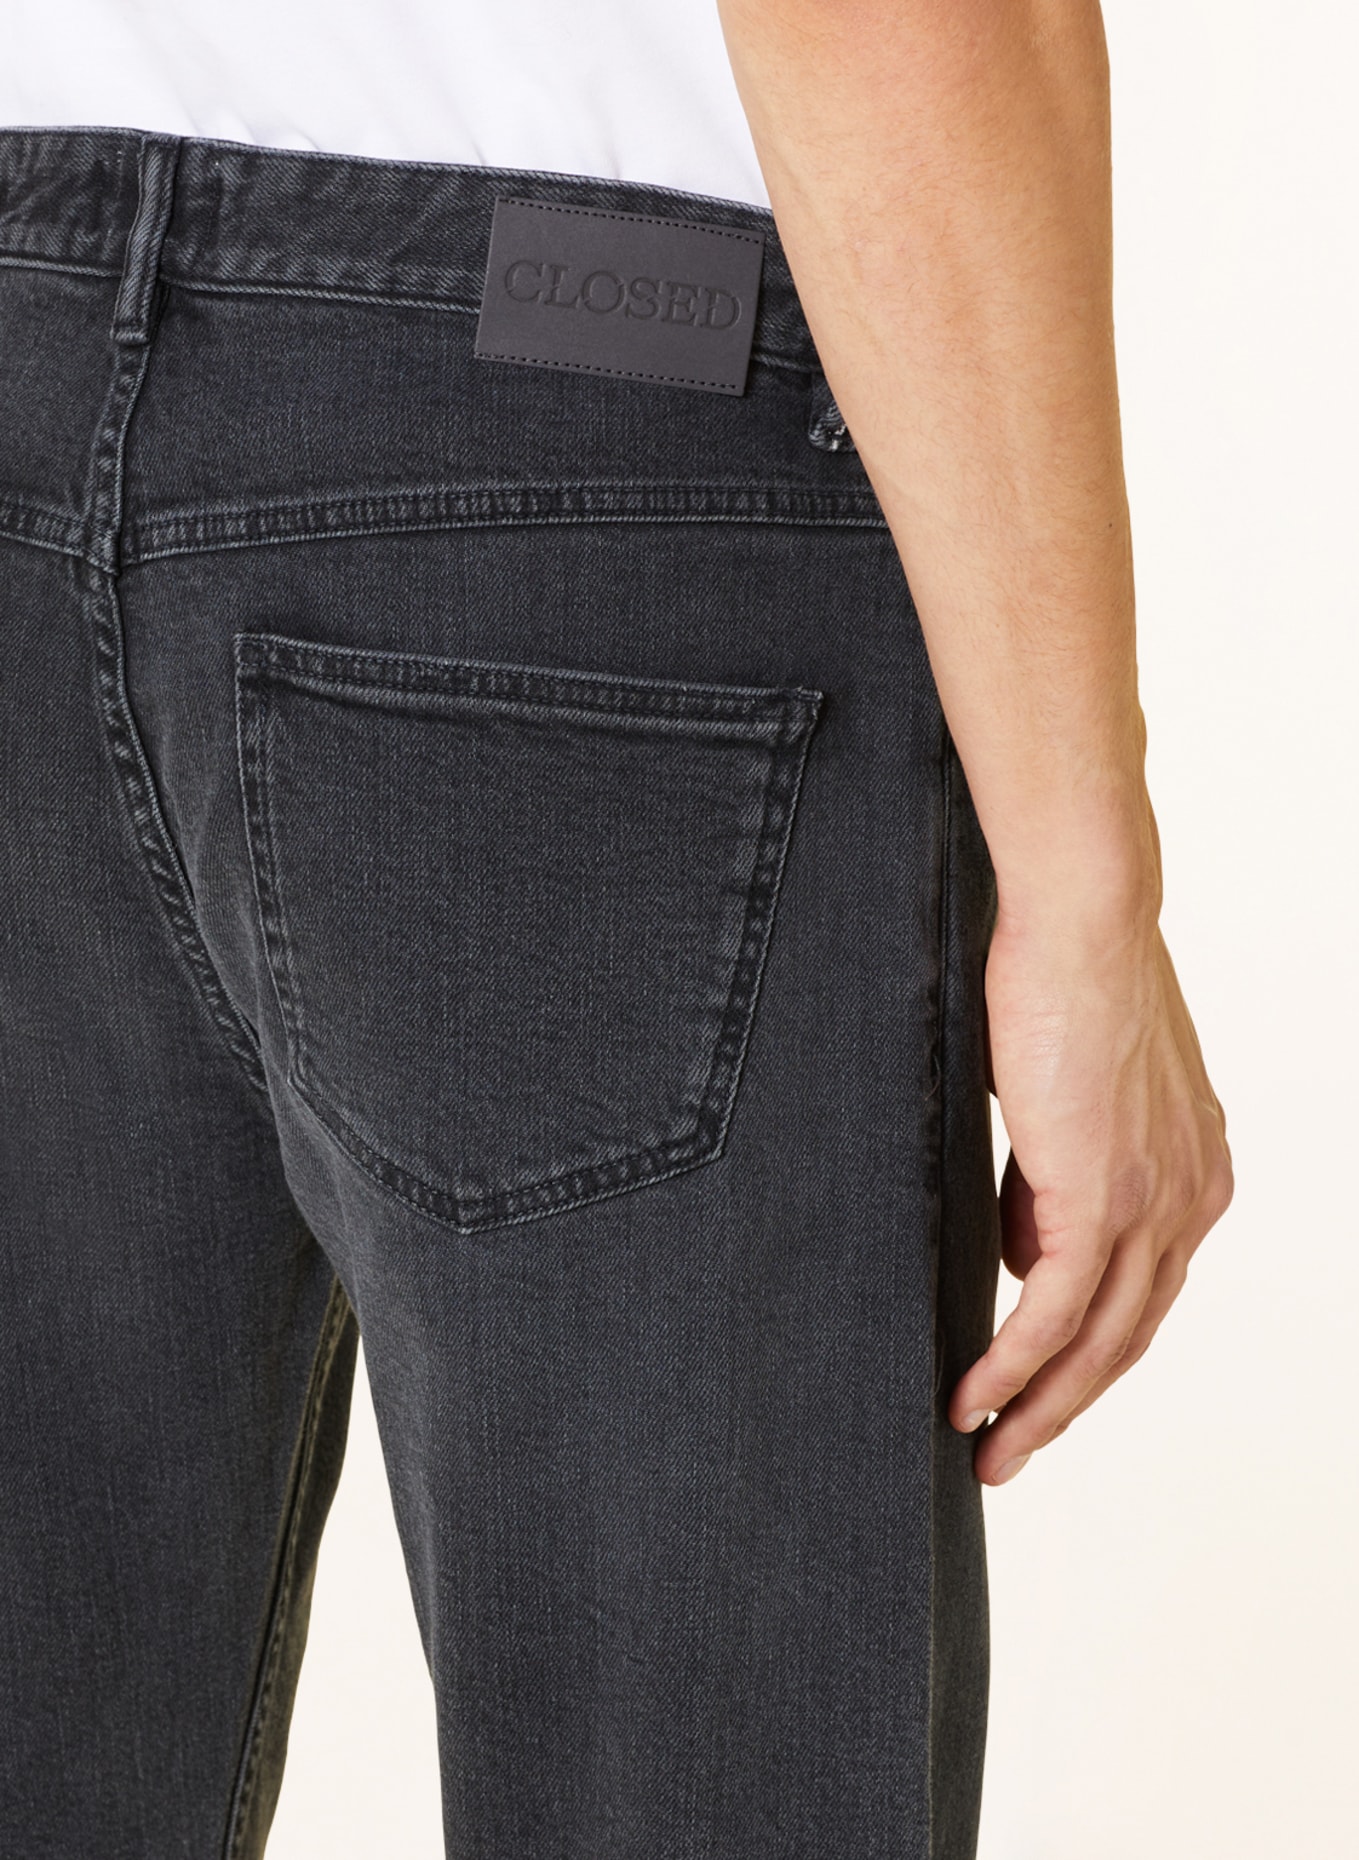 CLOSED Jeans COOPER Tapered Fit, Farbe: DGY DARK GREY (Bild 5)